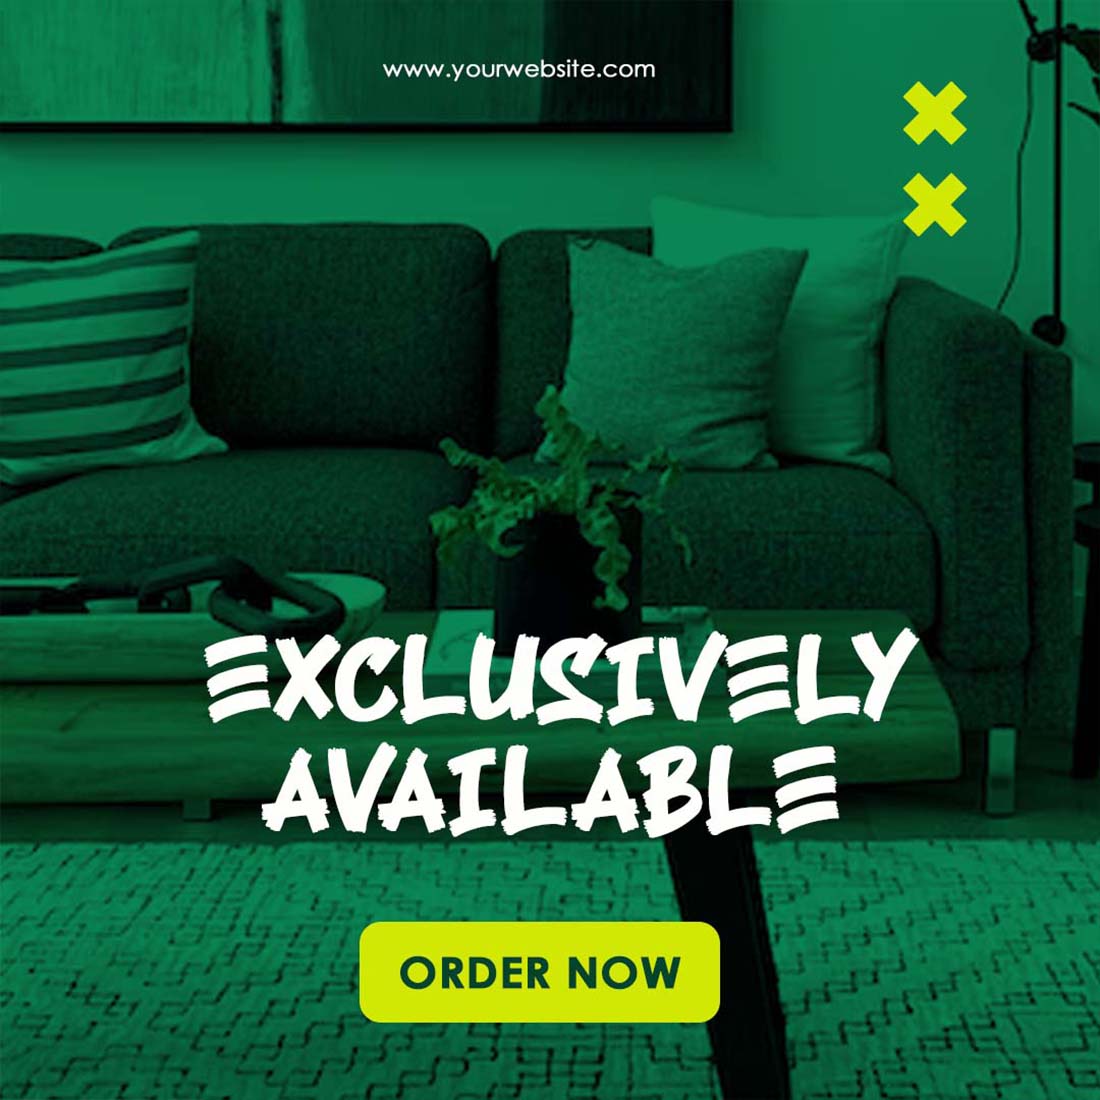 Furniture Instagram Post Templates cover image.